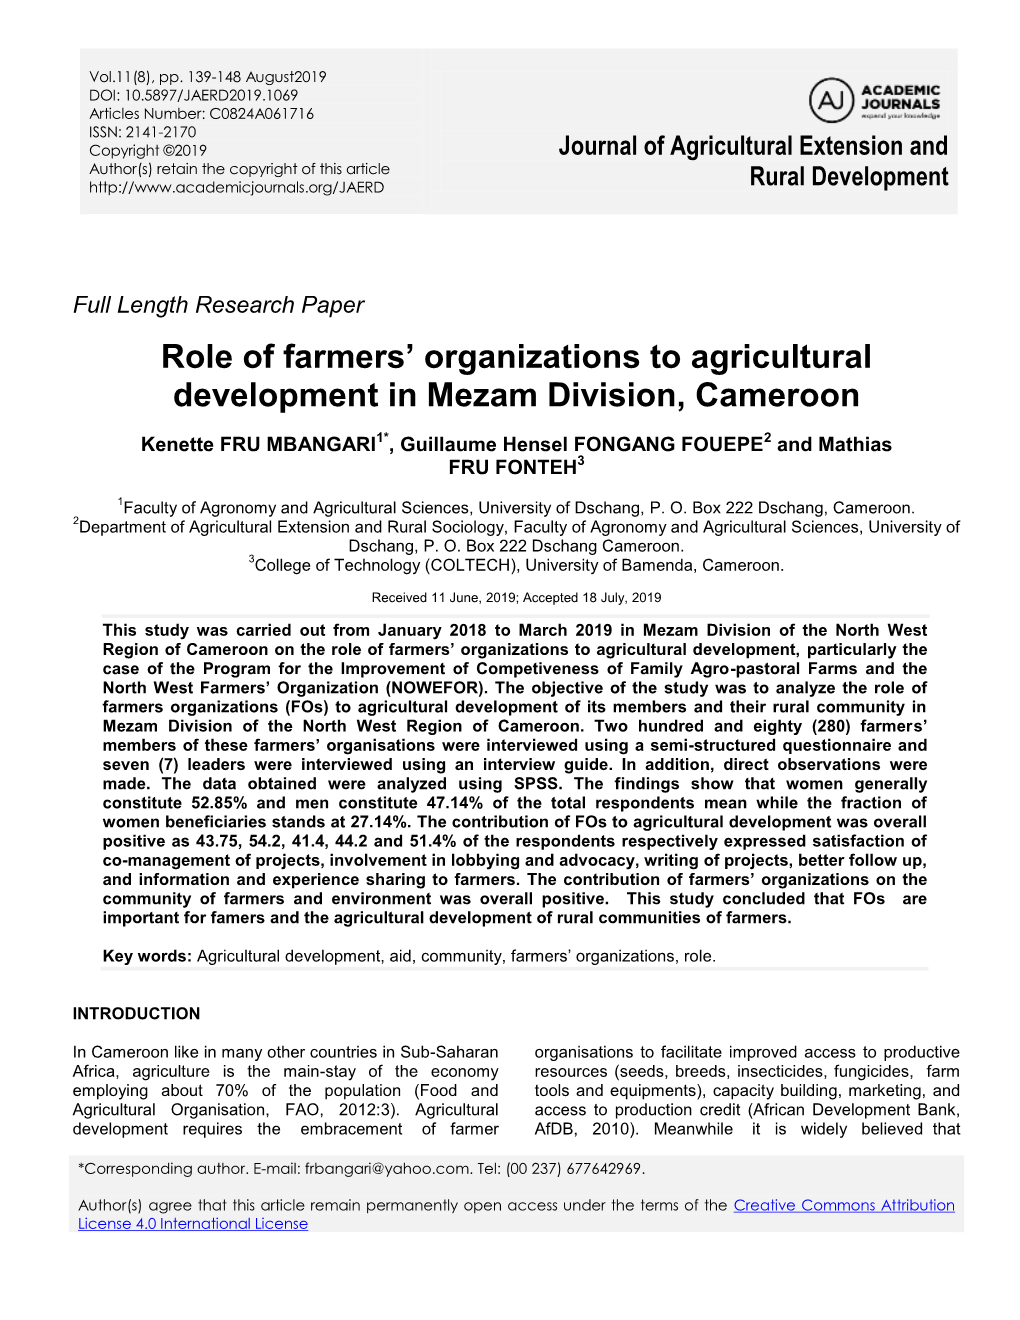 Role of Farmers' Organizations to Agricultural Development in Mezam